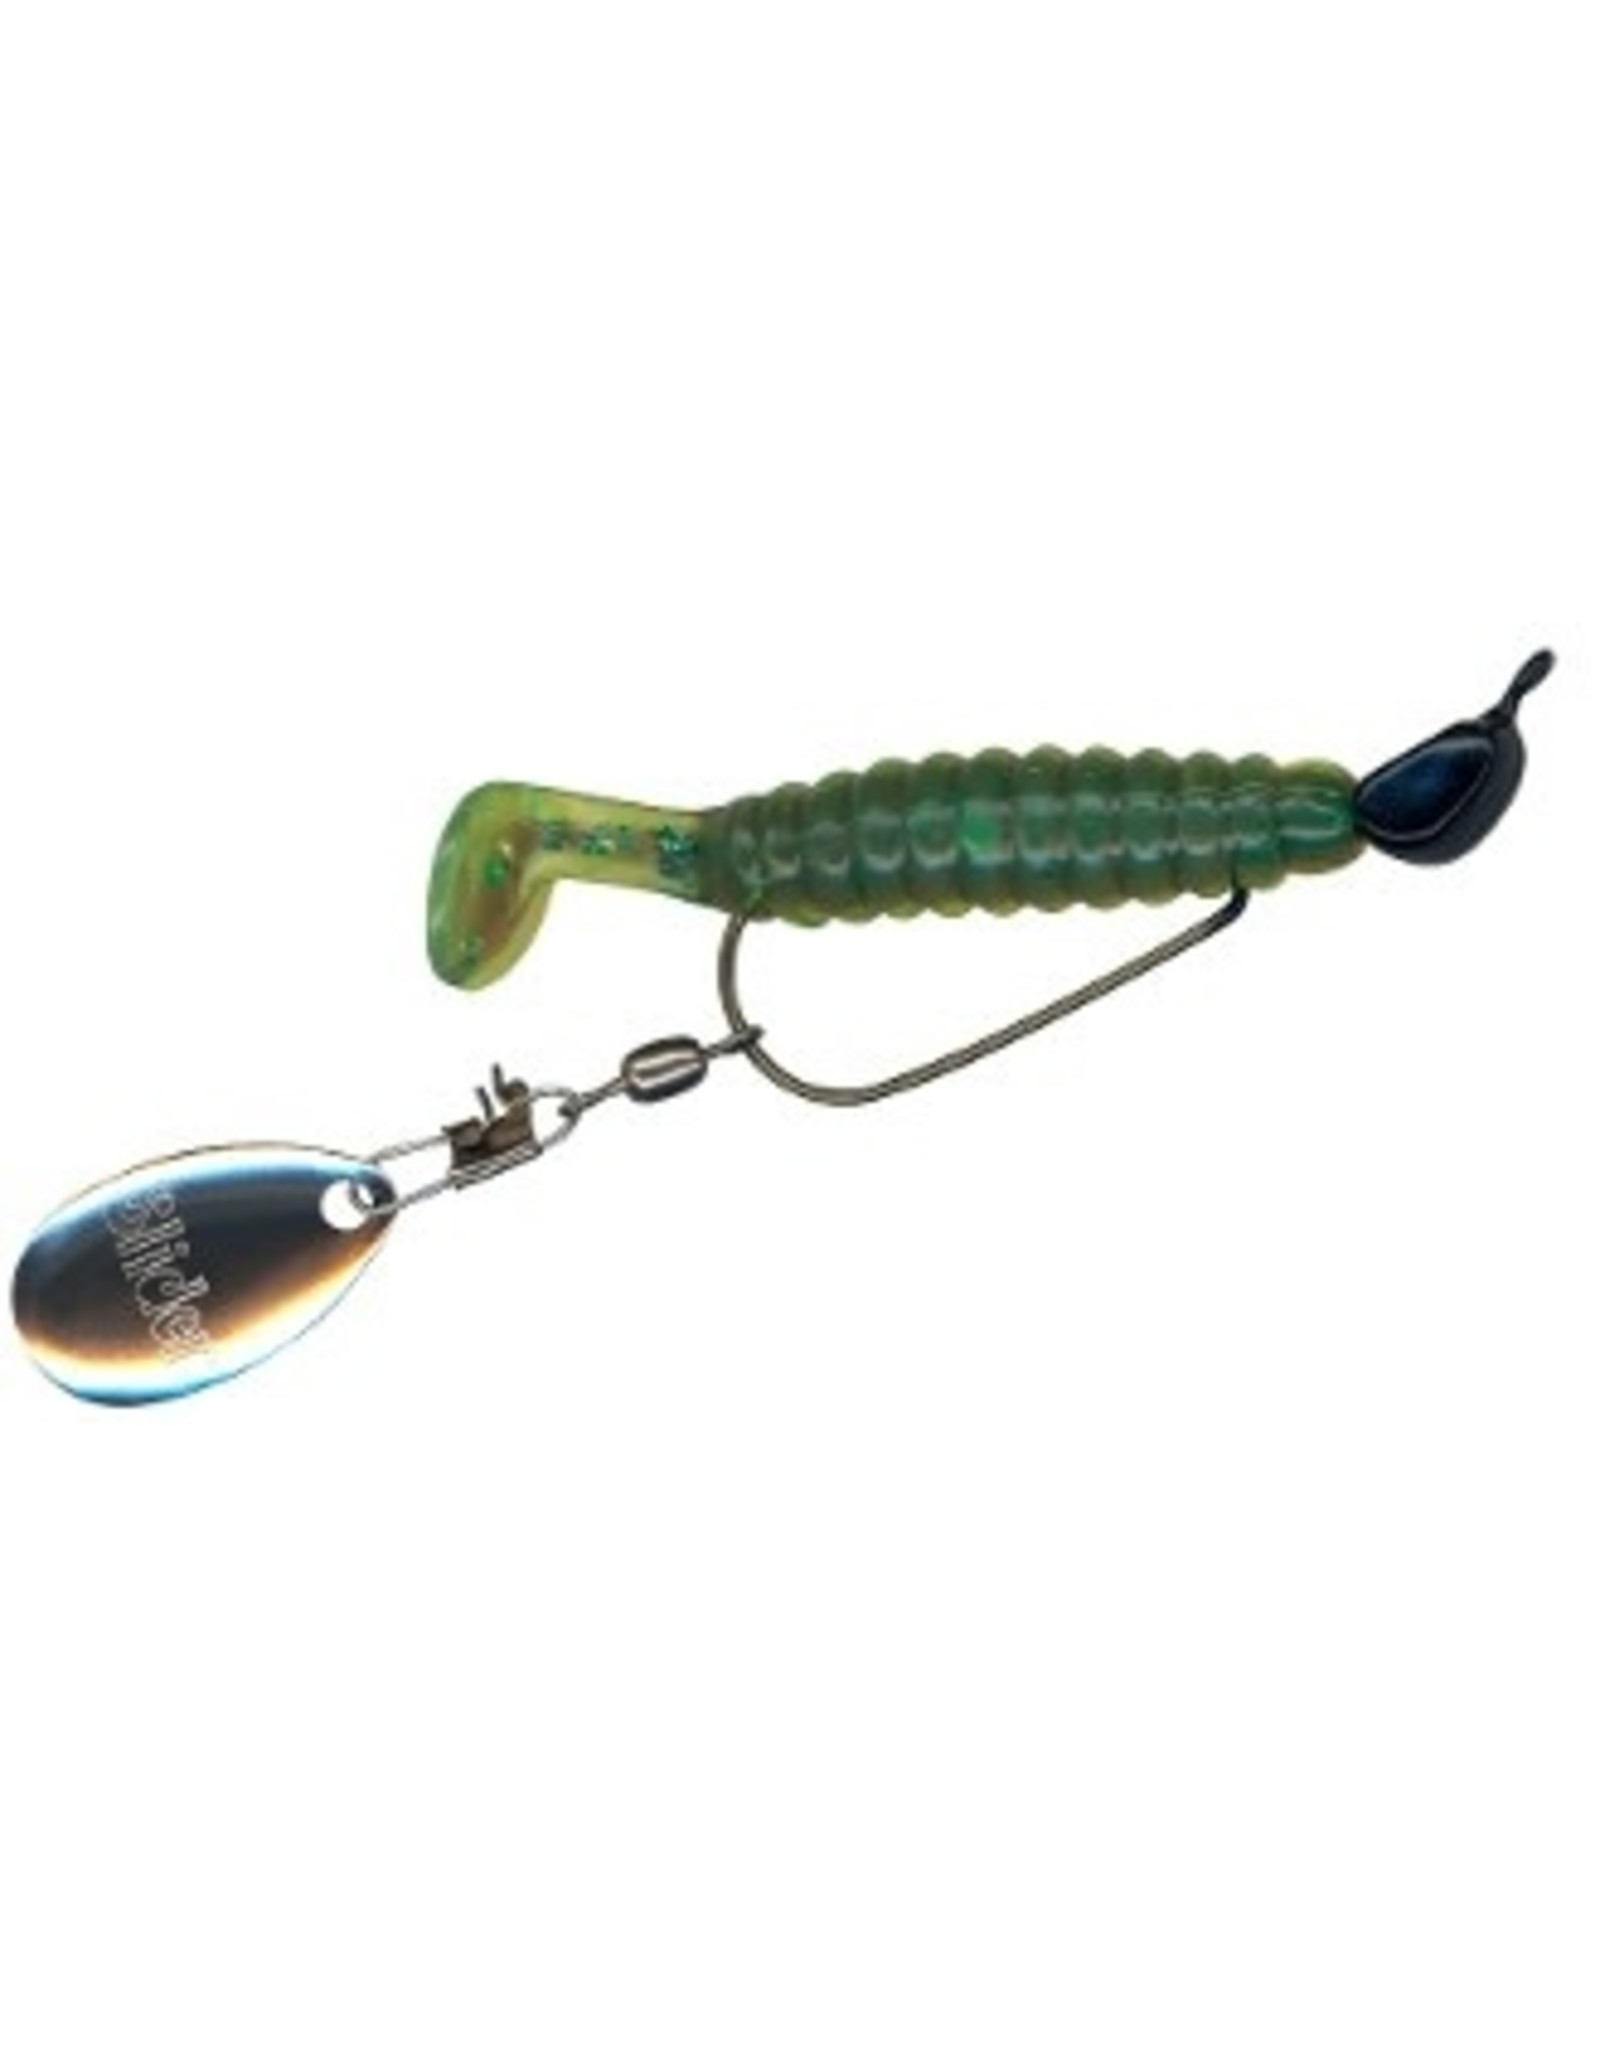 Charlie Brewer's Slider Company Crappie Slider with Blade